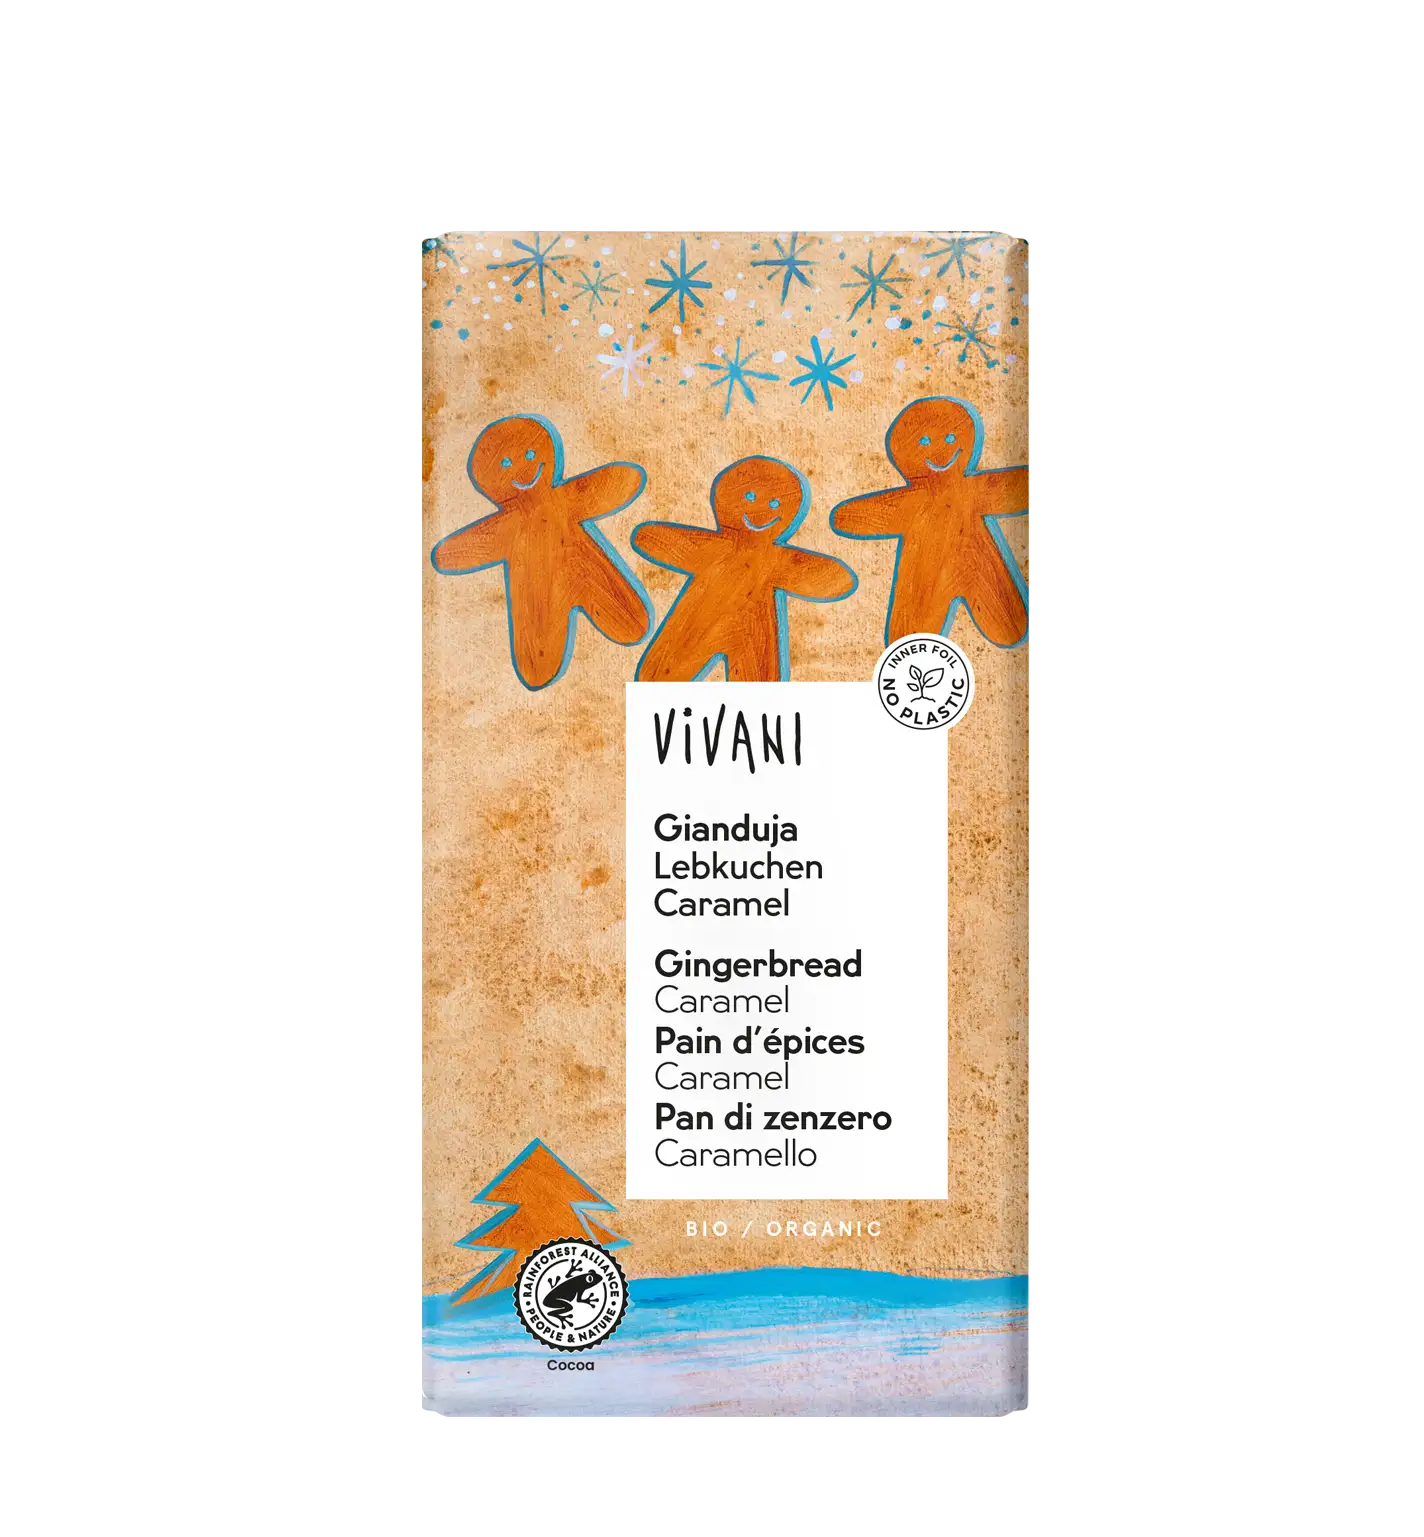 The organic Gianduja Gingerbread Caramel Christmas chocolate from VIVANI contains Christmas spices and gingerbread pieces.